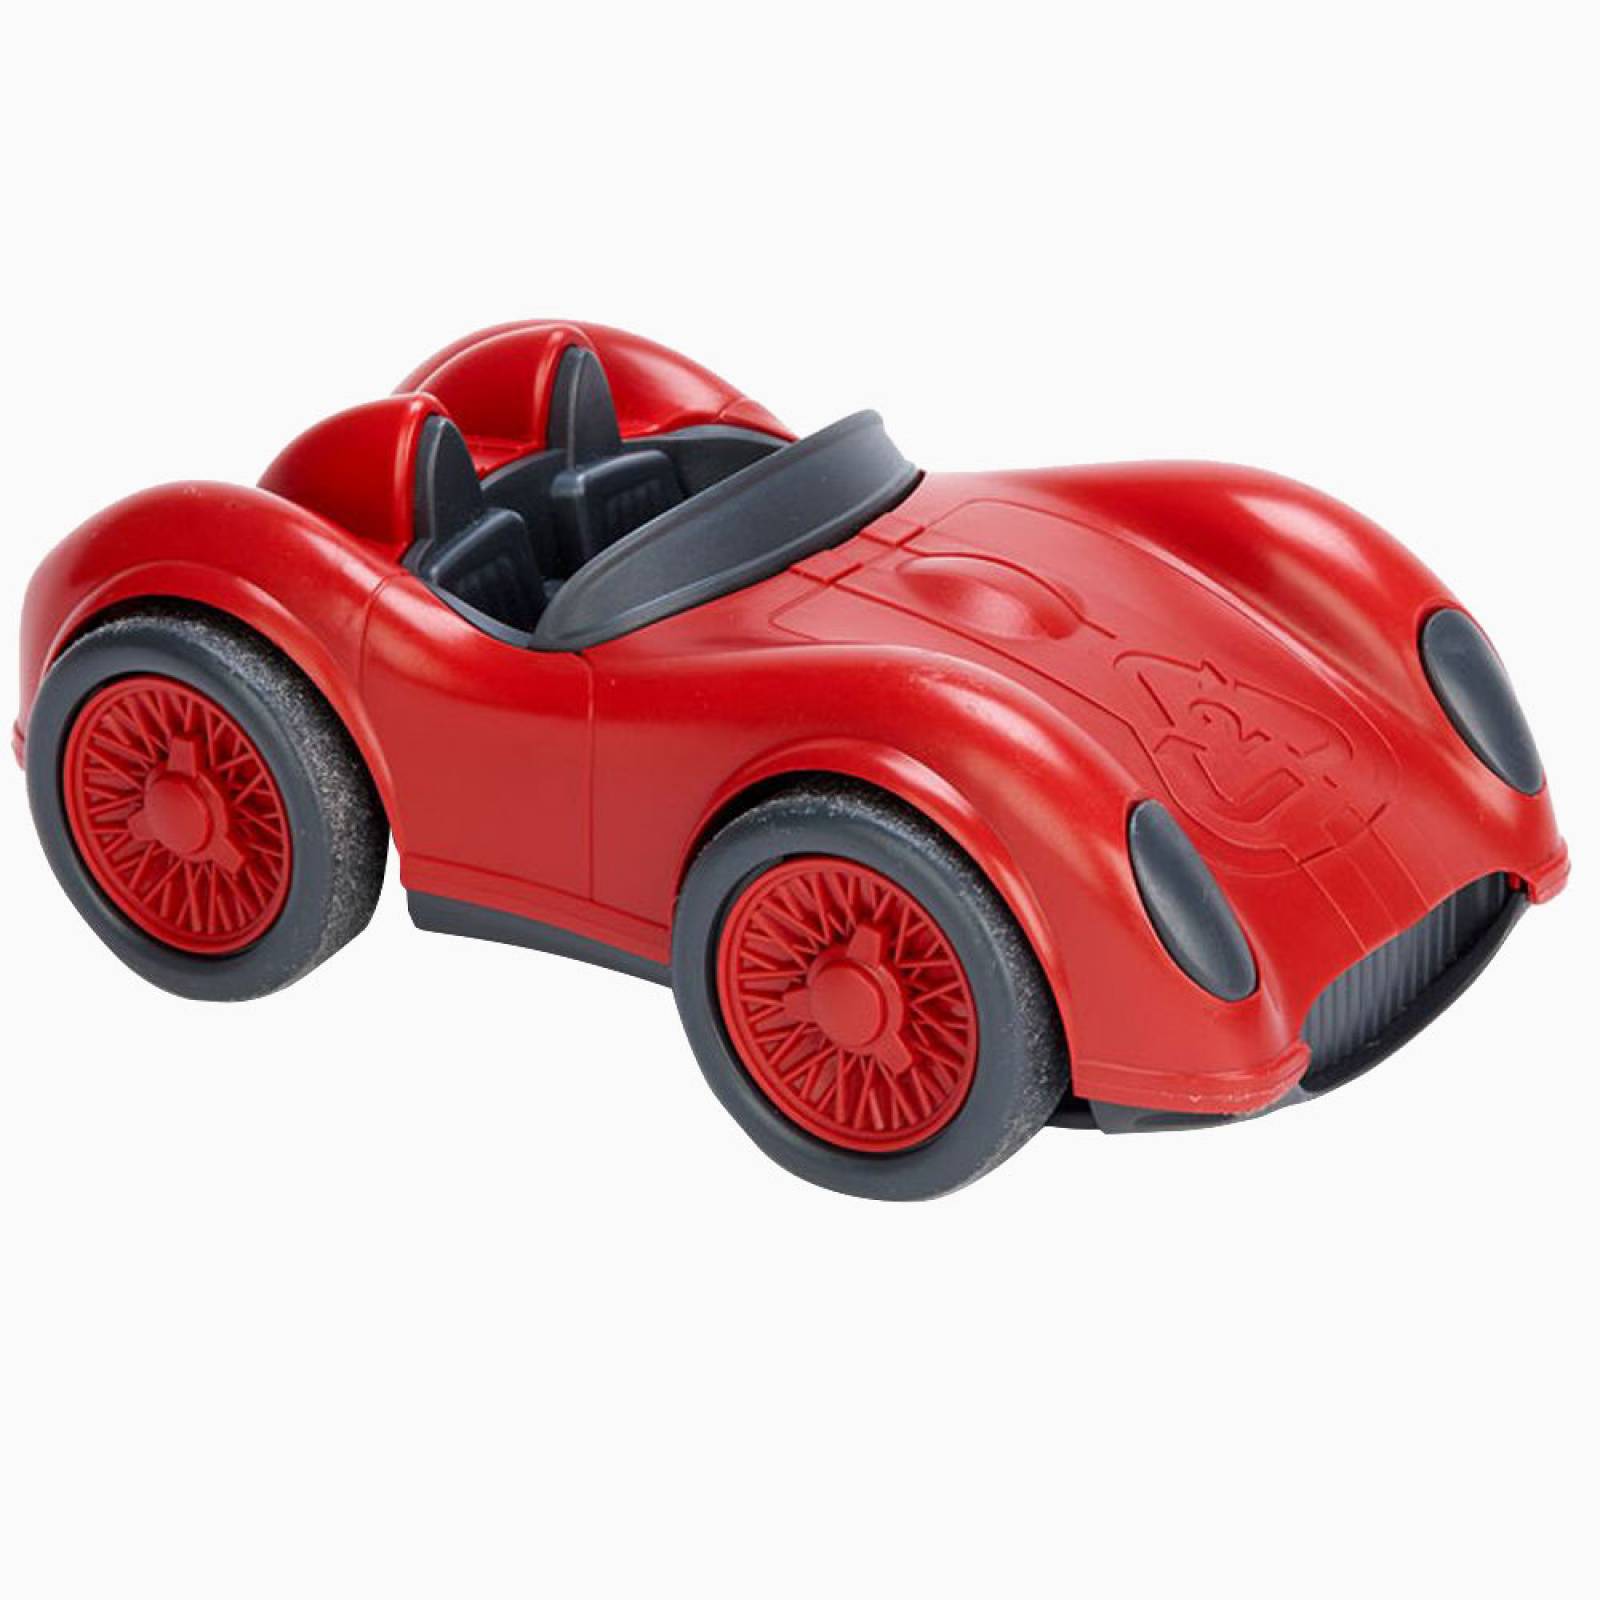 Red Race Car - Recycled Plastic By Green Toys 3+ thumbnails